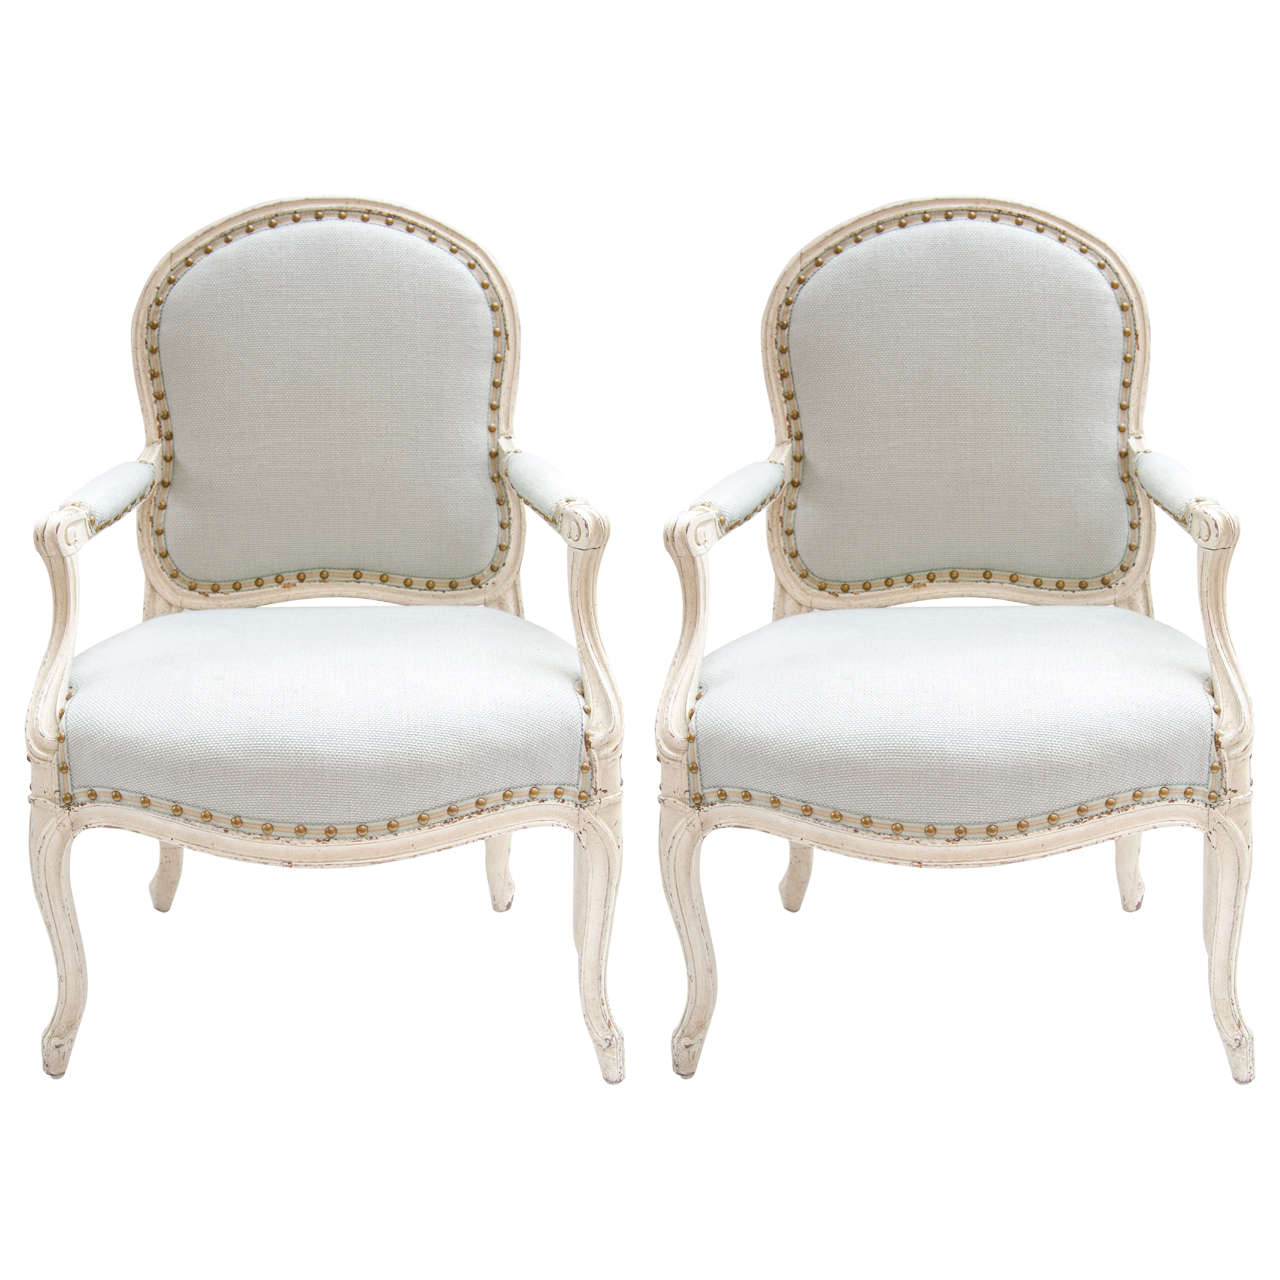 Pair of French Provincial Armchairs with Louis XVI Design